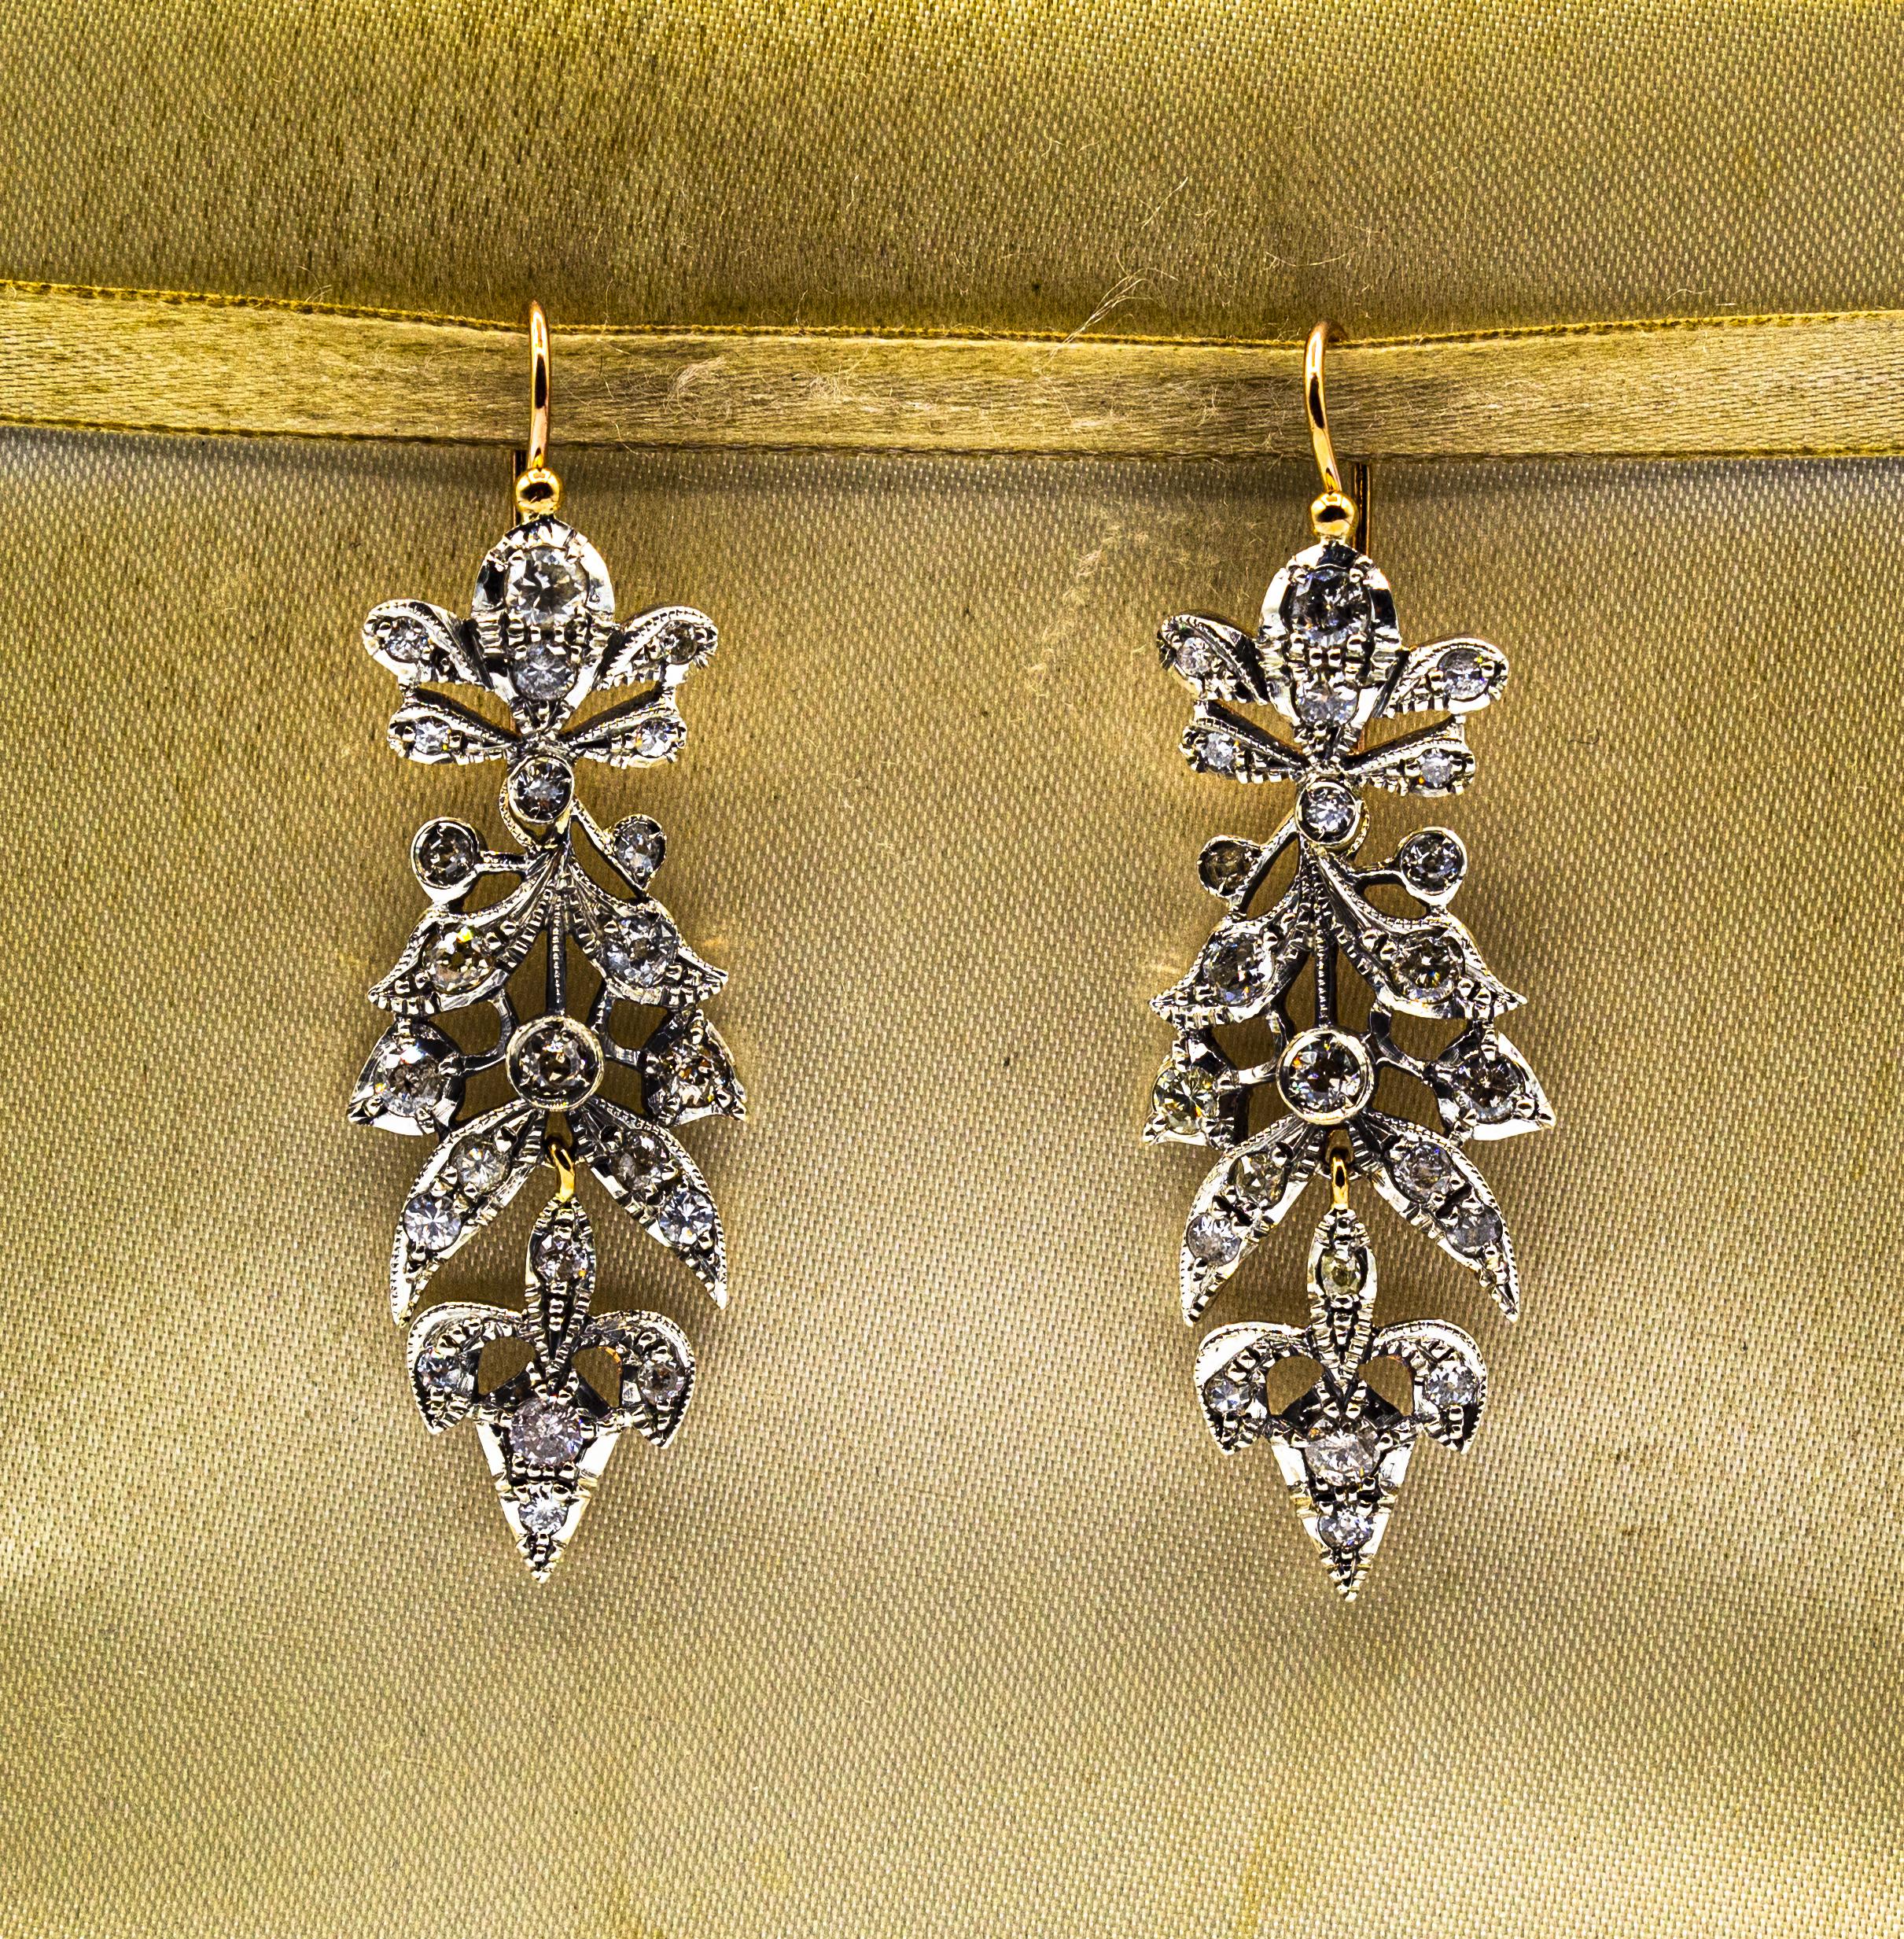 These Earrings are made of 9K Yellow Gold and Sterling Silver.
These Earrings have 4.14 Carats of White Brilliant Cut Diamonds.

All our Earrings have pins for pierced ears but we can change the closure and make any of our Earrings suitable even for